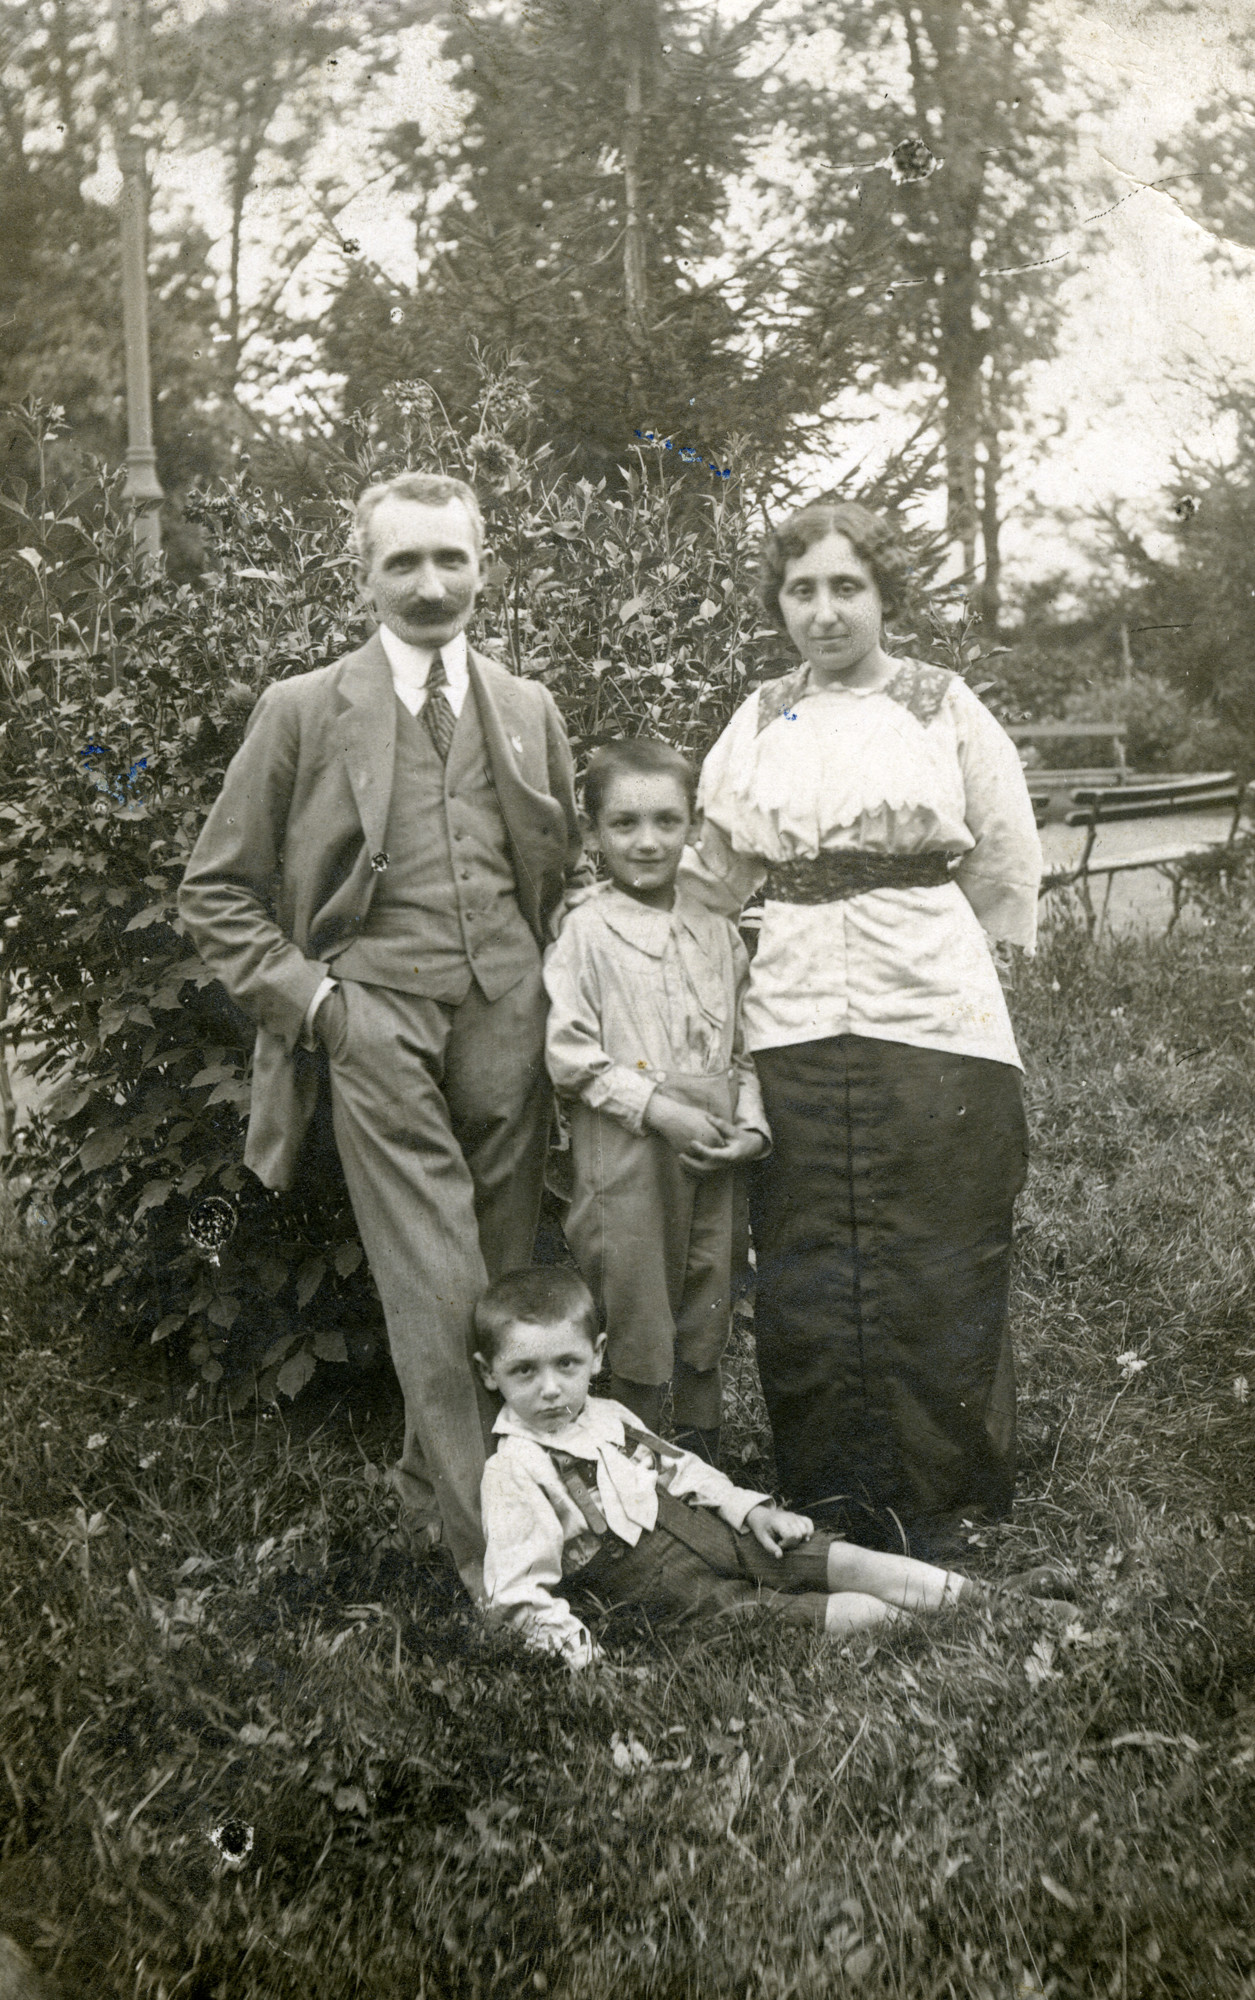 Outdoor portrait of a Romanian Jewish family.

Pictured are  Milo and Helene Gelehrter with their sons, Felix (lower) and Moni.